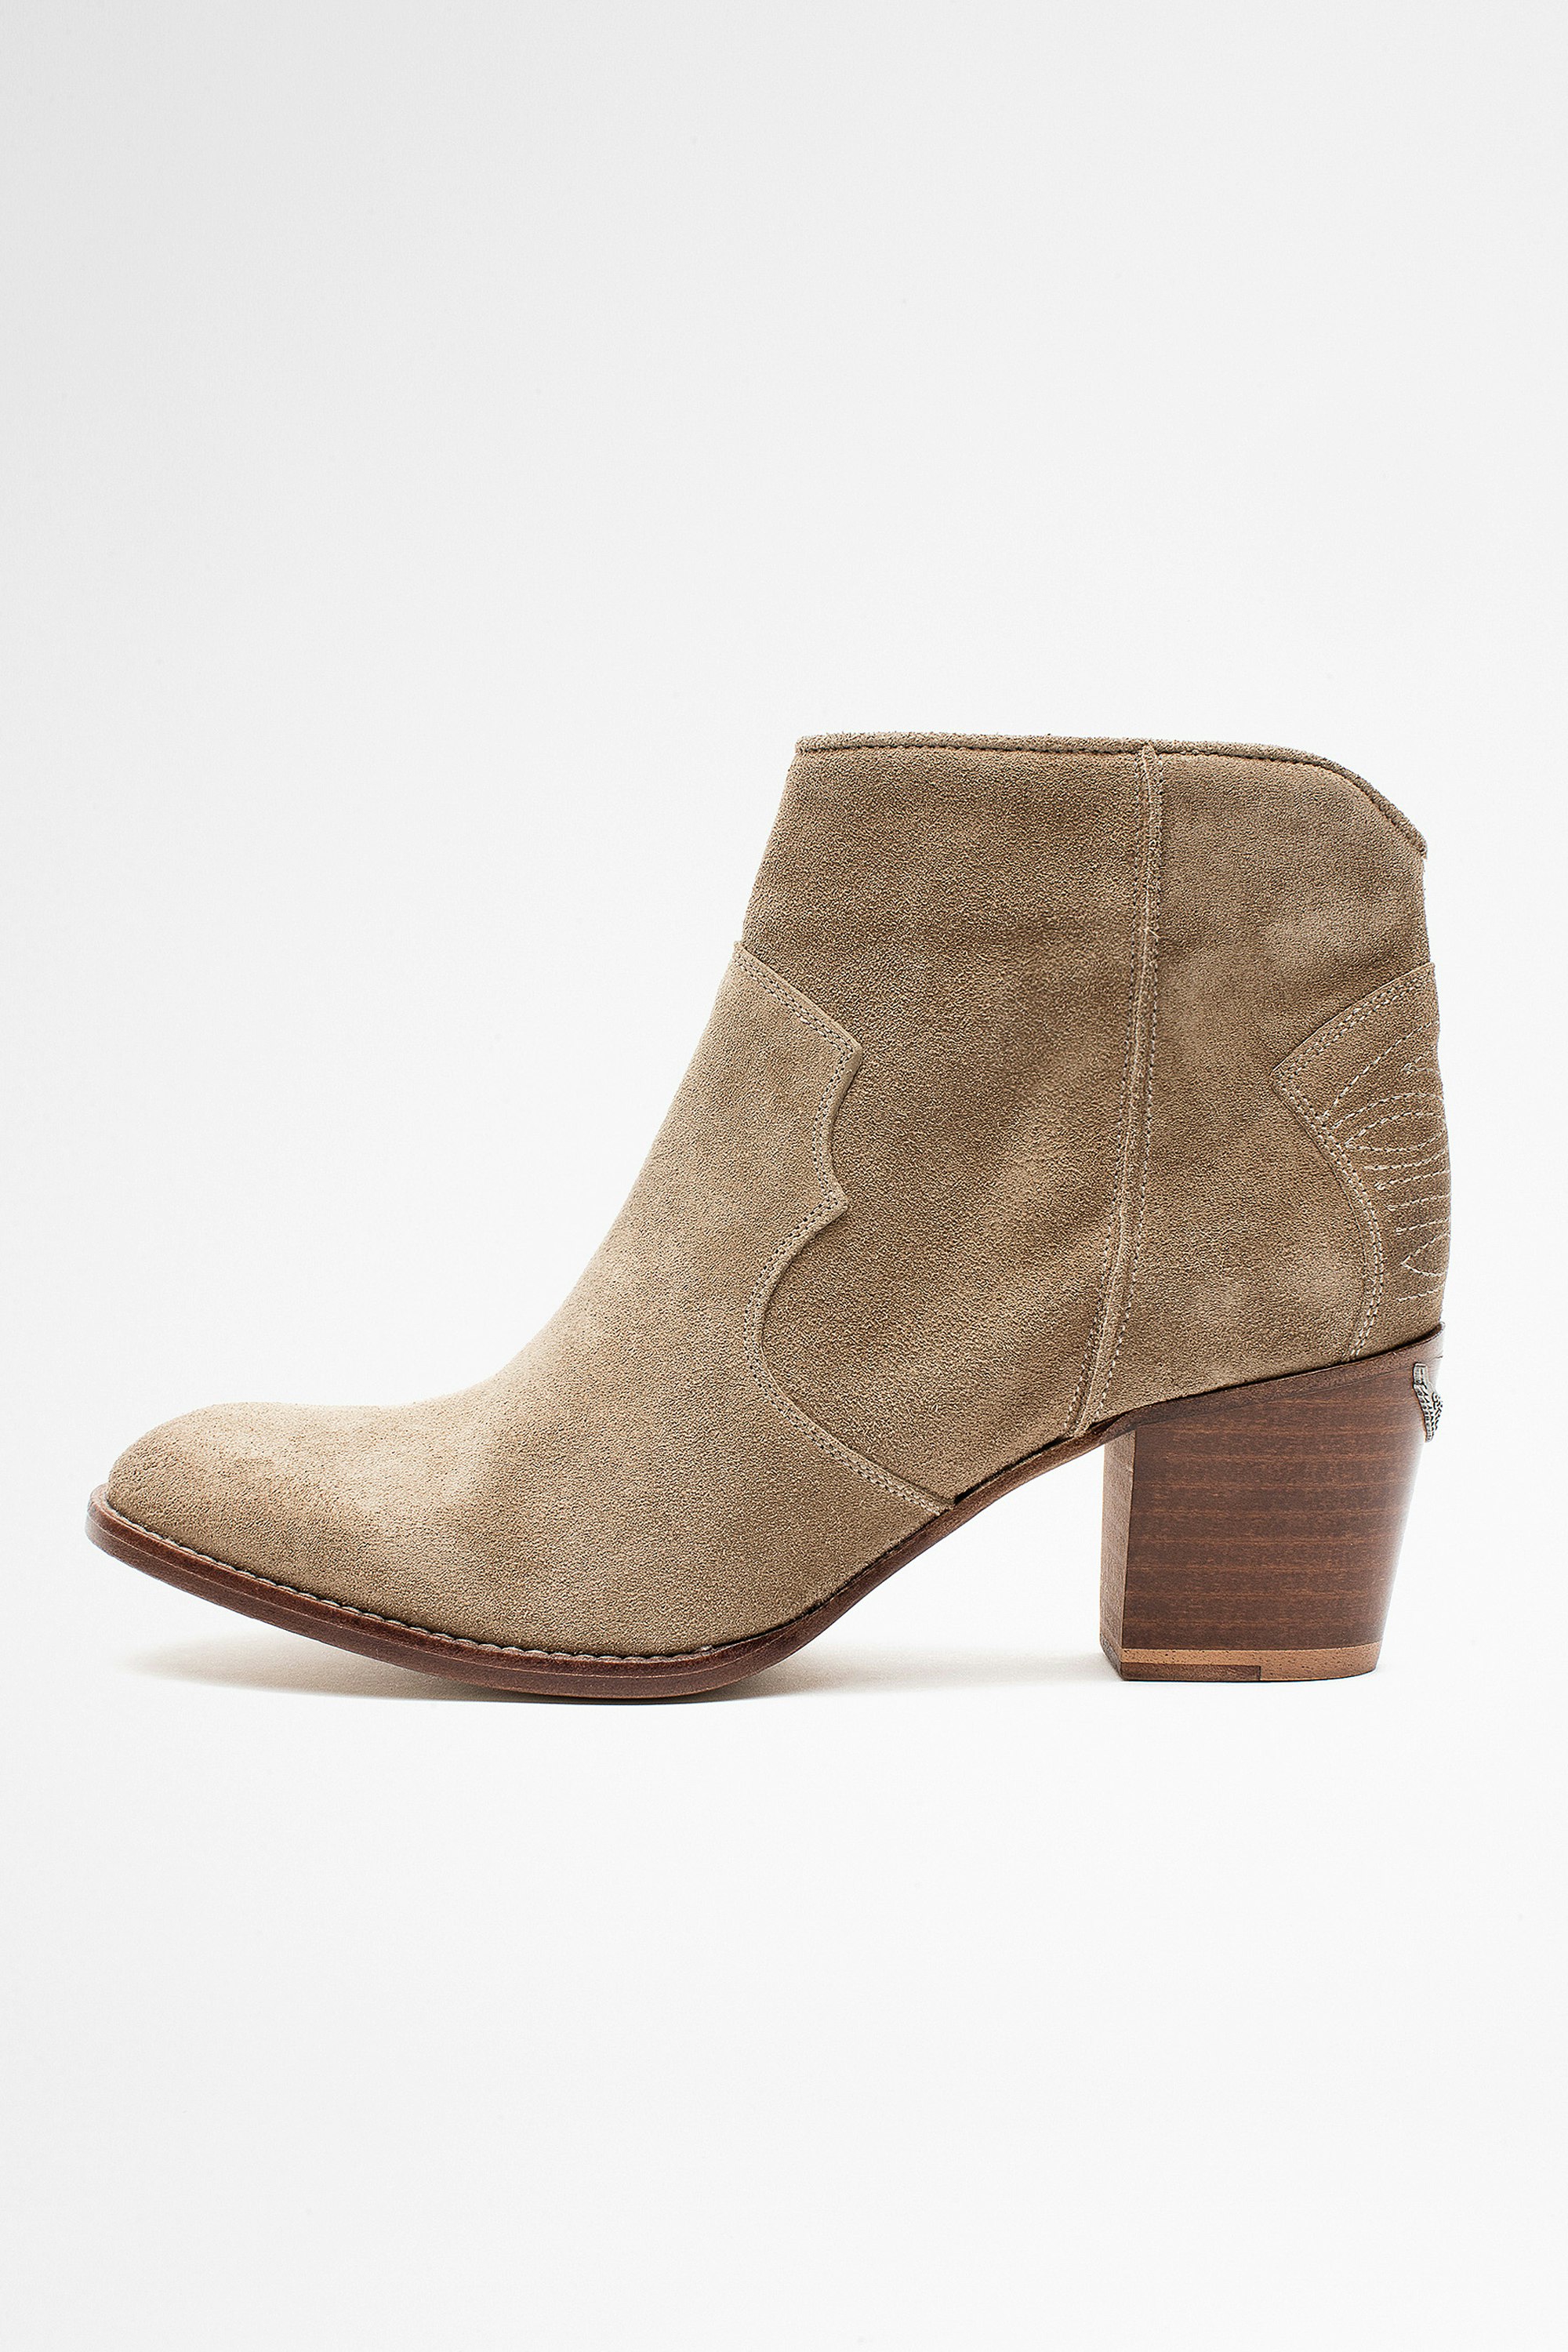 Molly Suede Boots